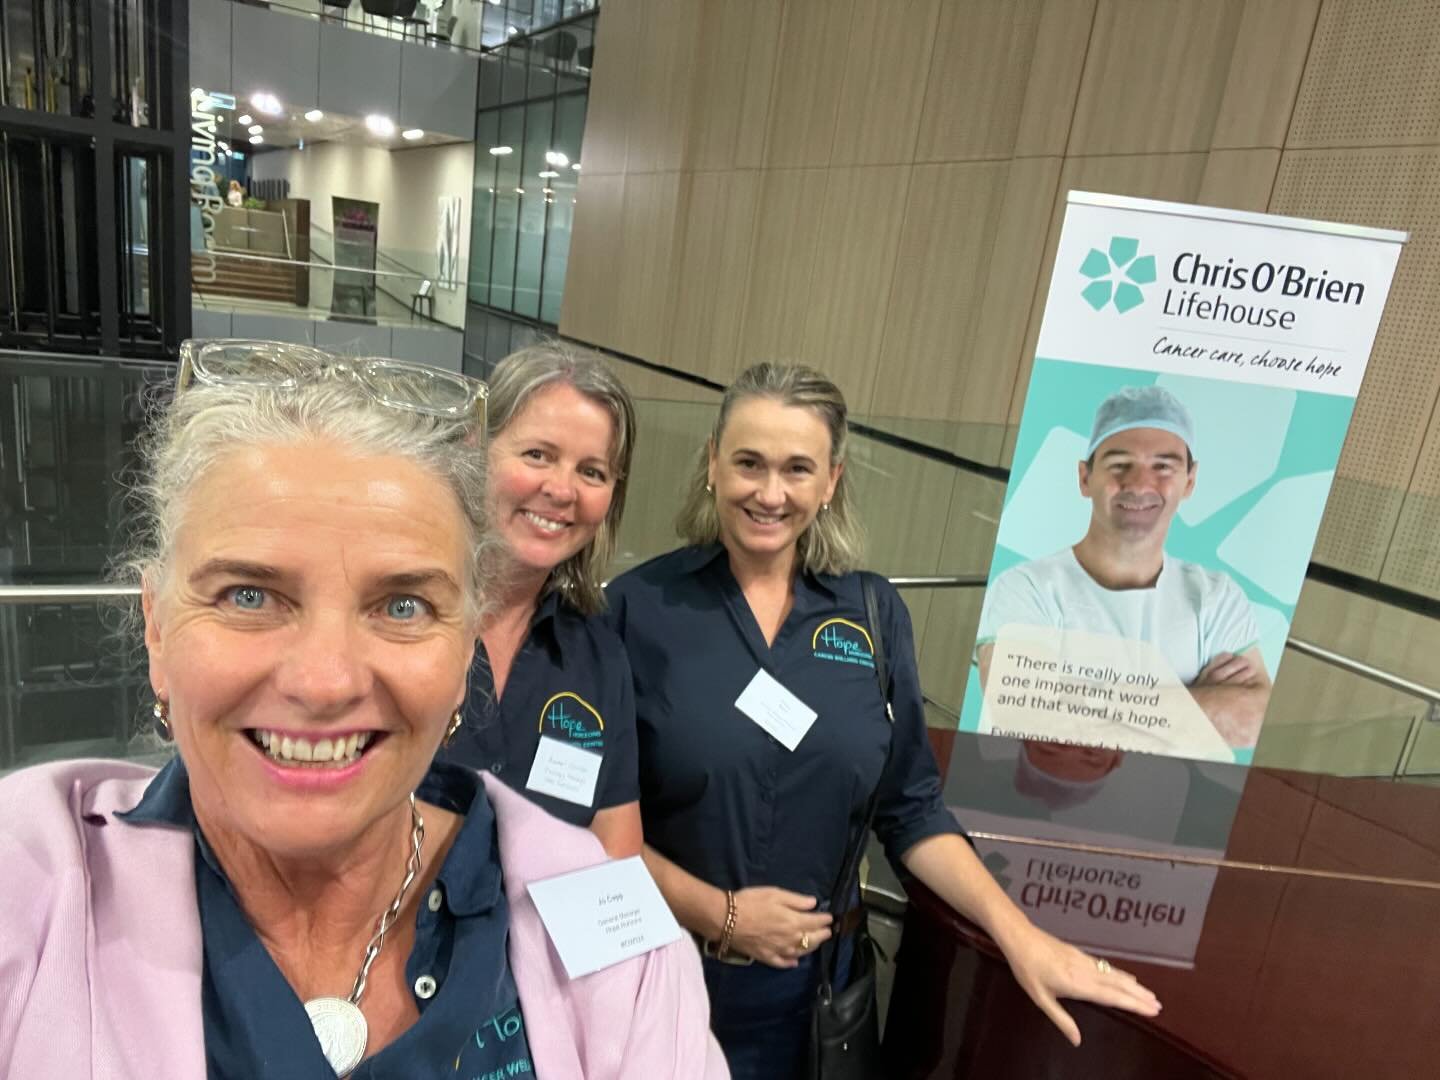 The last two days three representatives from @hopehorizonstoowoomba attended the first national symposium on integrated cancer care at the @chris_obrien_lifehouse . It was the most incredible conference meeting likeminded people from all over Austral